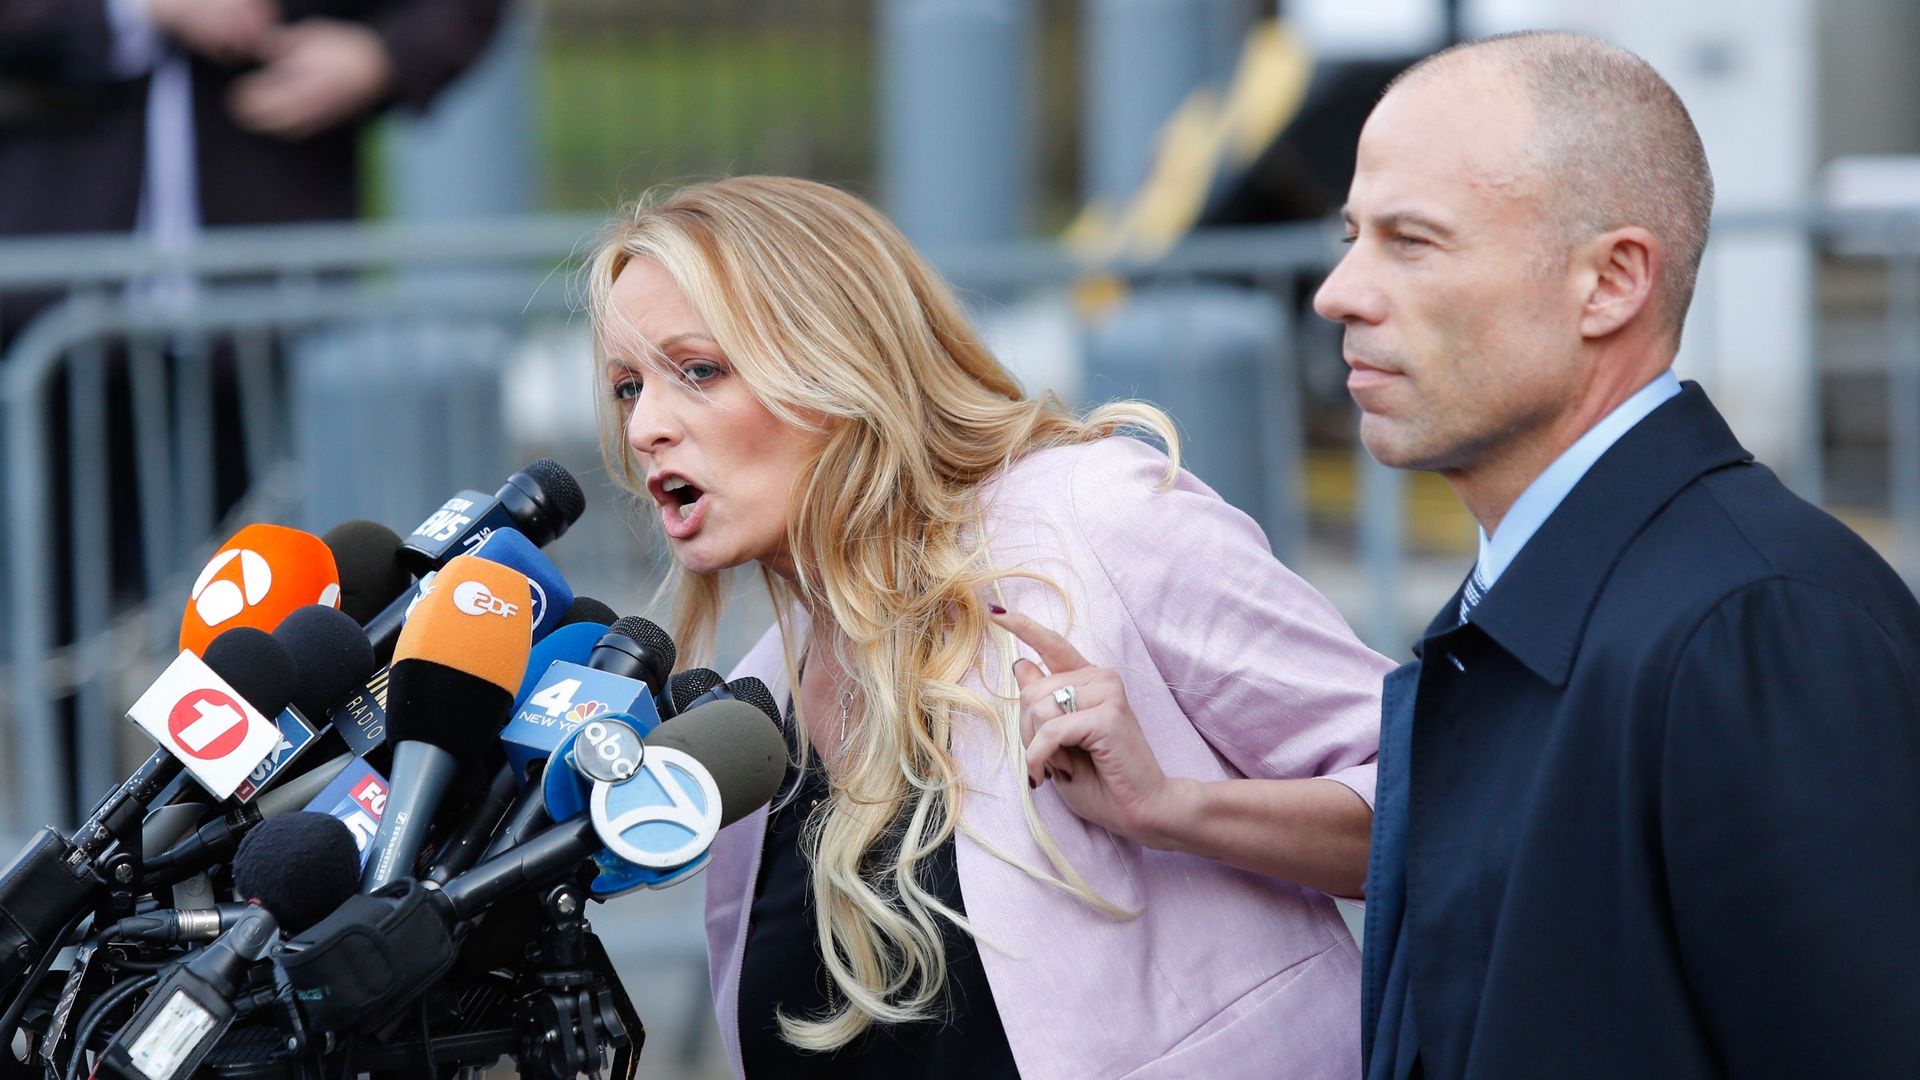 Adult-film actress Stephanie Clifford, also known as Stormy Daniels and awyer Michael Avenatti. 